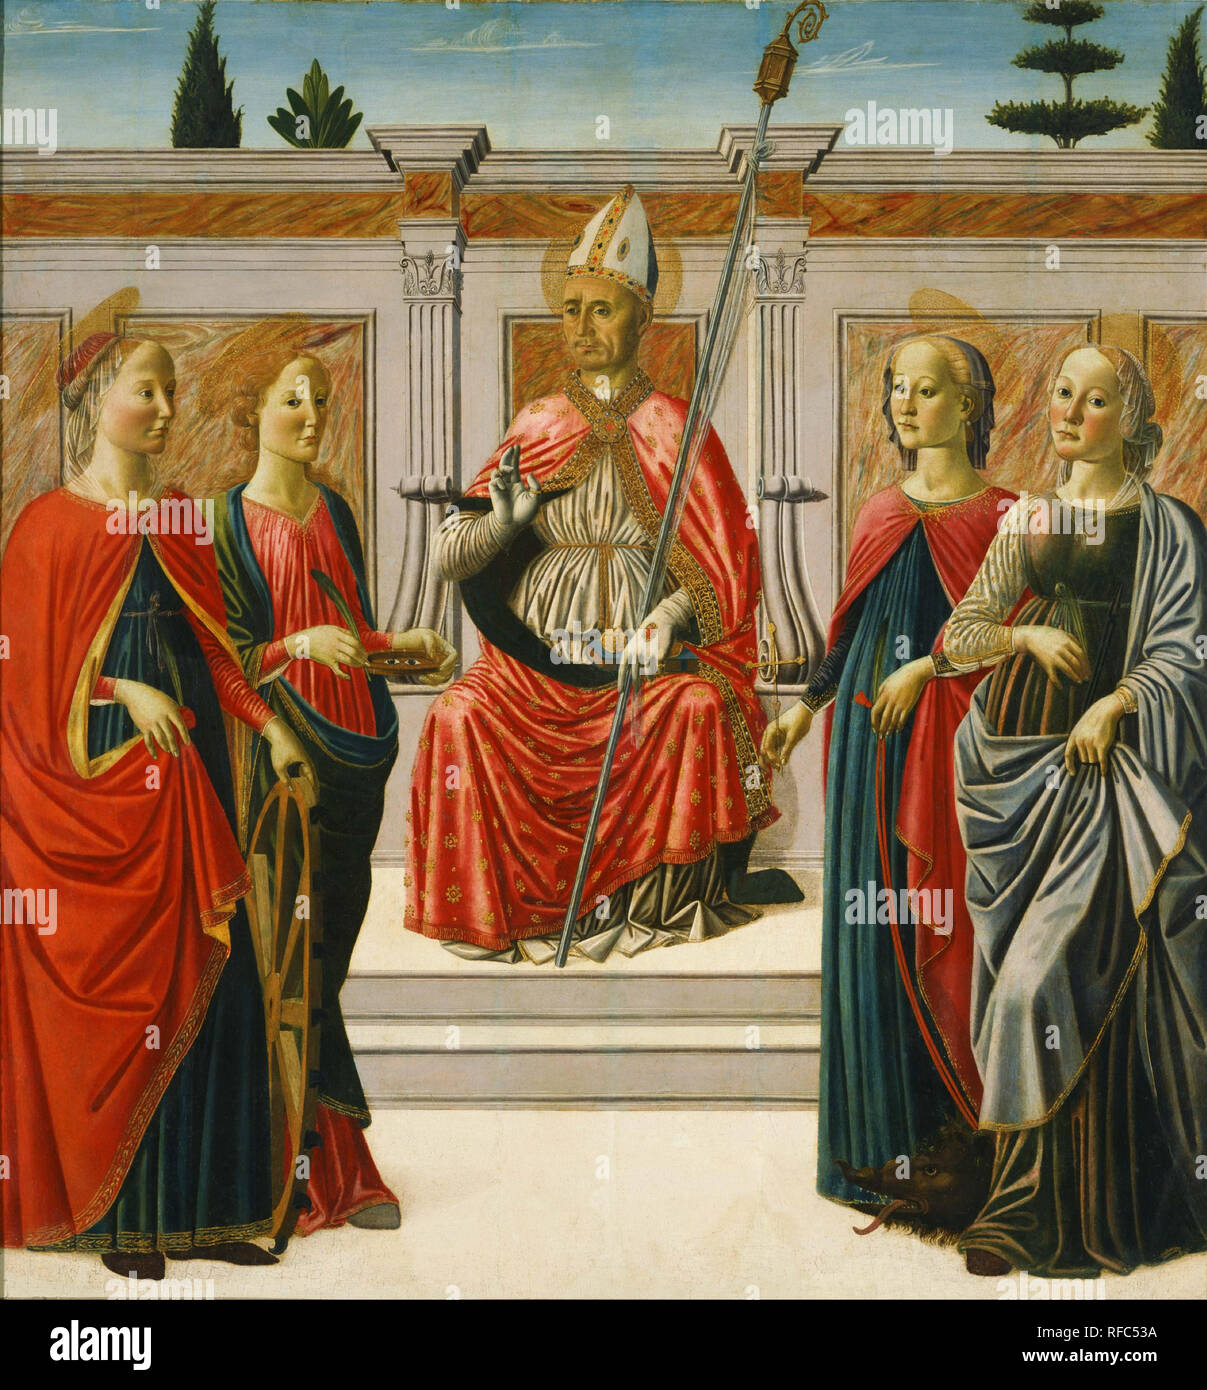 St. Nicolas and Sts. Catherine, Lucy, Margaret and Apollonia. Painting. Tempera on panel Tempera on panel. Height: 1,150 mm (45.27 in); Width: 1,225 mm (48.22 in). Author: Francesco Botticini. BOTTICINI, FRANCESCO. Stock Photo